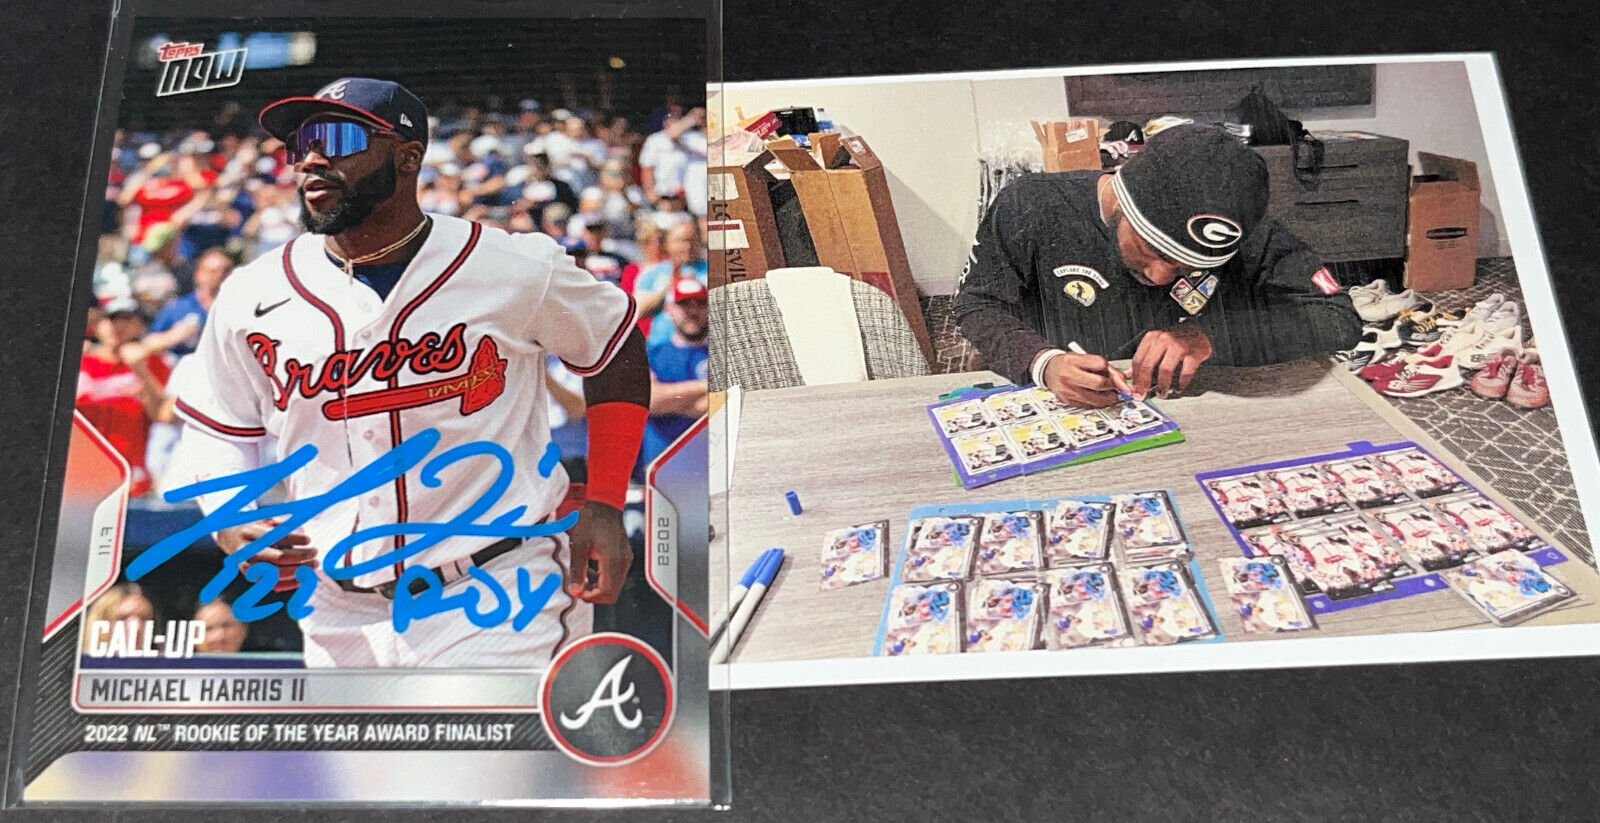 Michael Harris Braves Auto Signed 2022 Topps Now Rookie of the Year Finalist